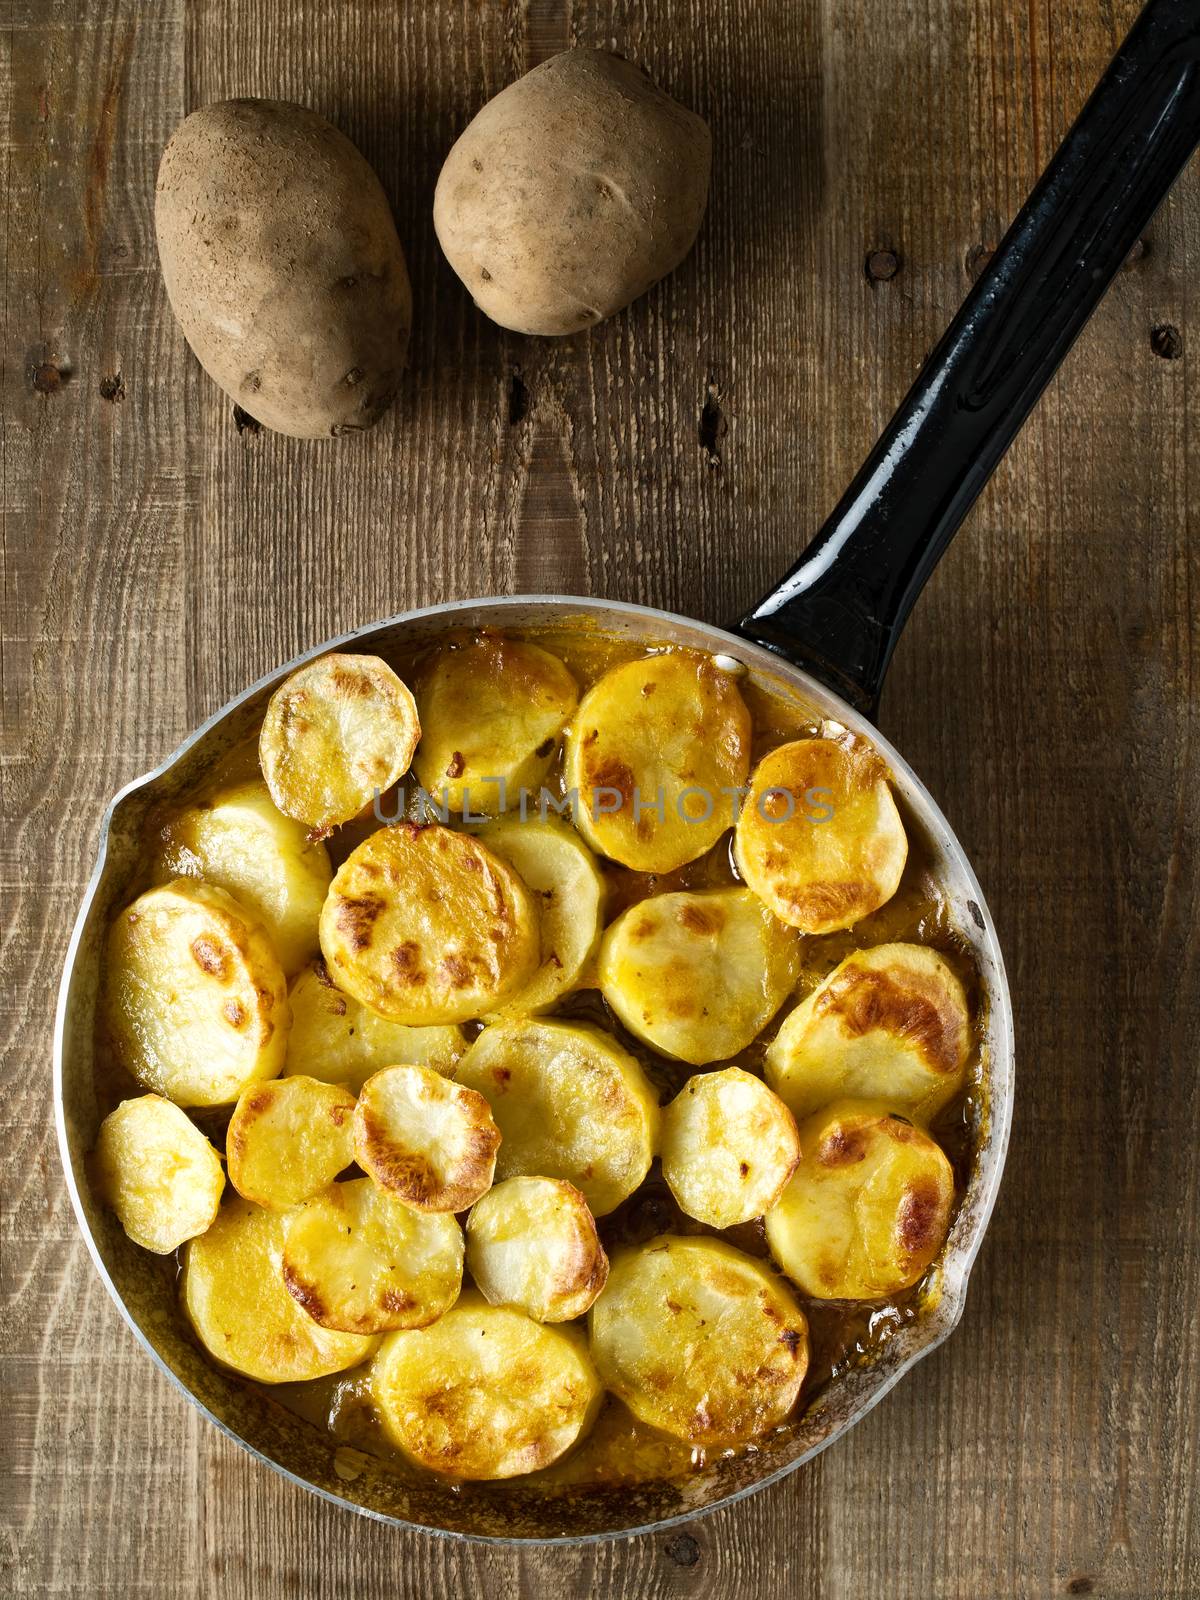 rustic english lancashire hotpot by zkruger